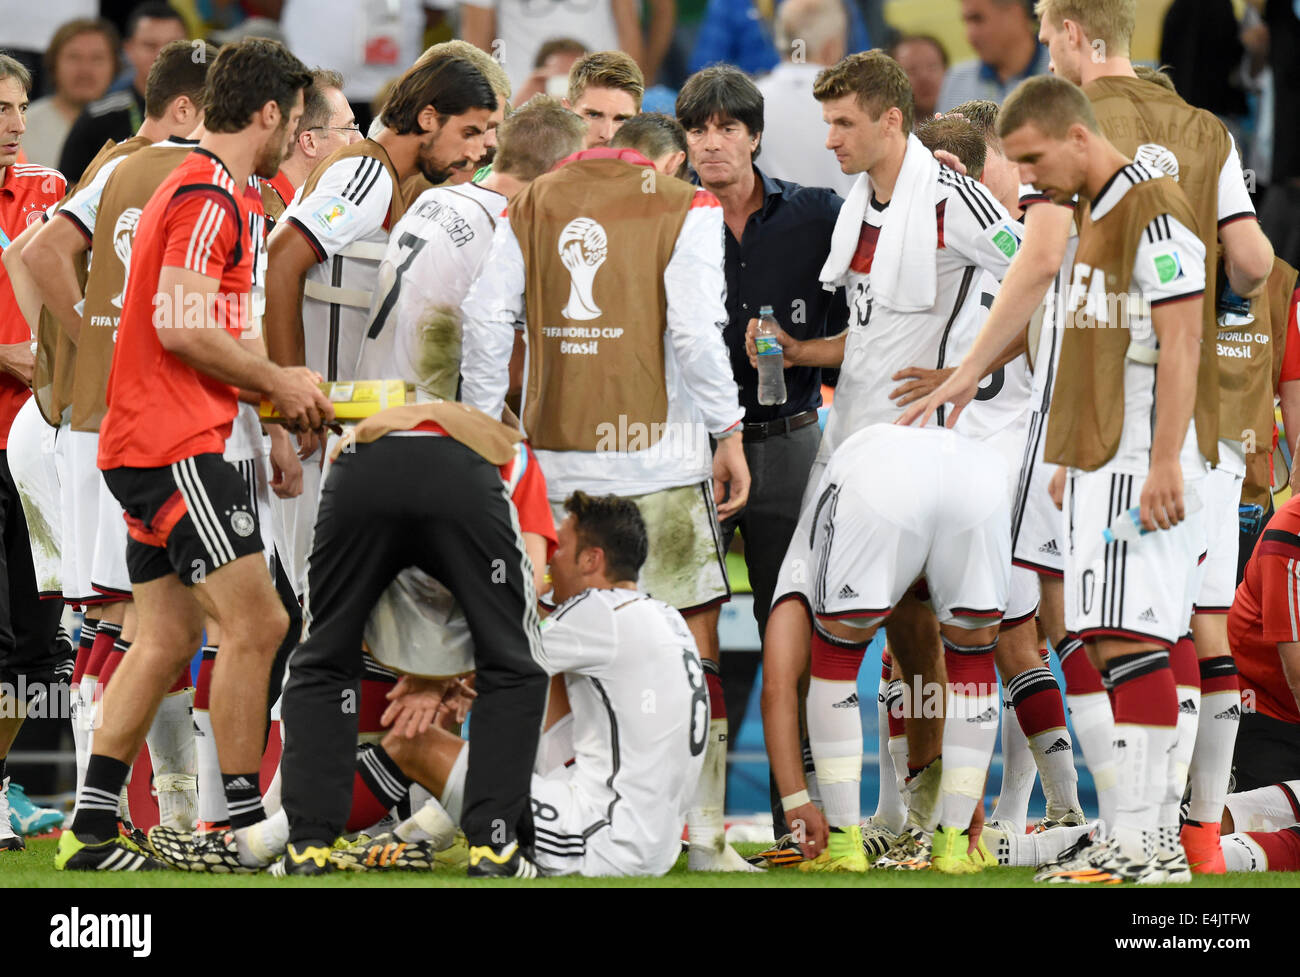 Rio de Janeiro, Brazil. 13th July, 2014. Head coach Joachim Loew (C) of Germany talks to his players during a break prior to the overtime during the FIFA World Cup 2014 final soccer match between Germany and Argentina at the Estadio do Maracana in Rio de Janeiro, Brazil, 13 July 2014. Photo: Marcus Brandt/dpa/Alamy Live News Stock Photo